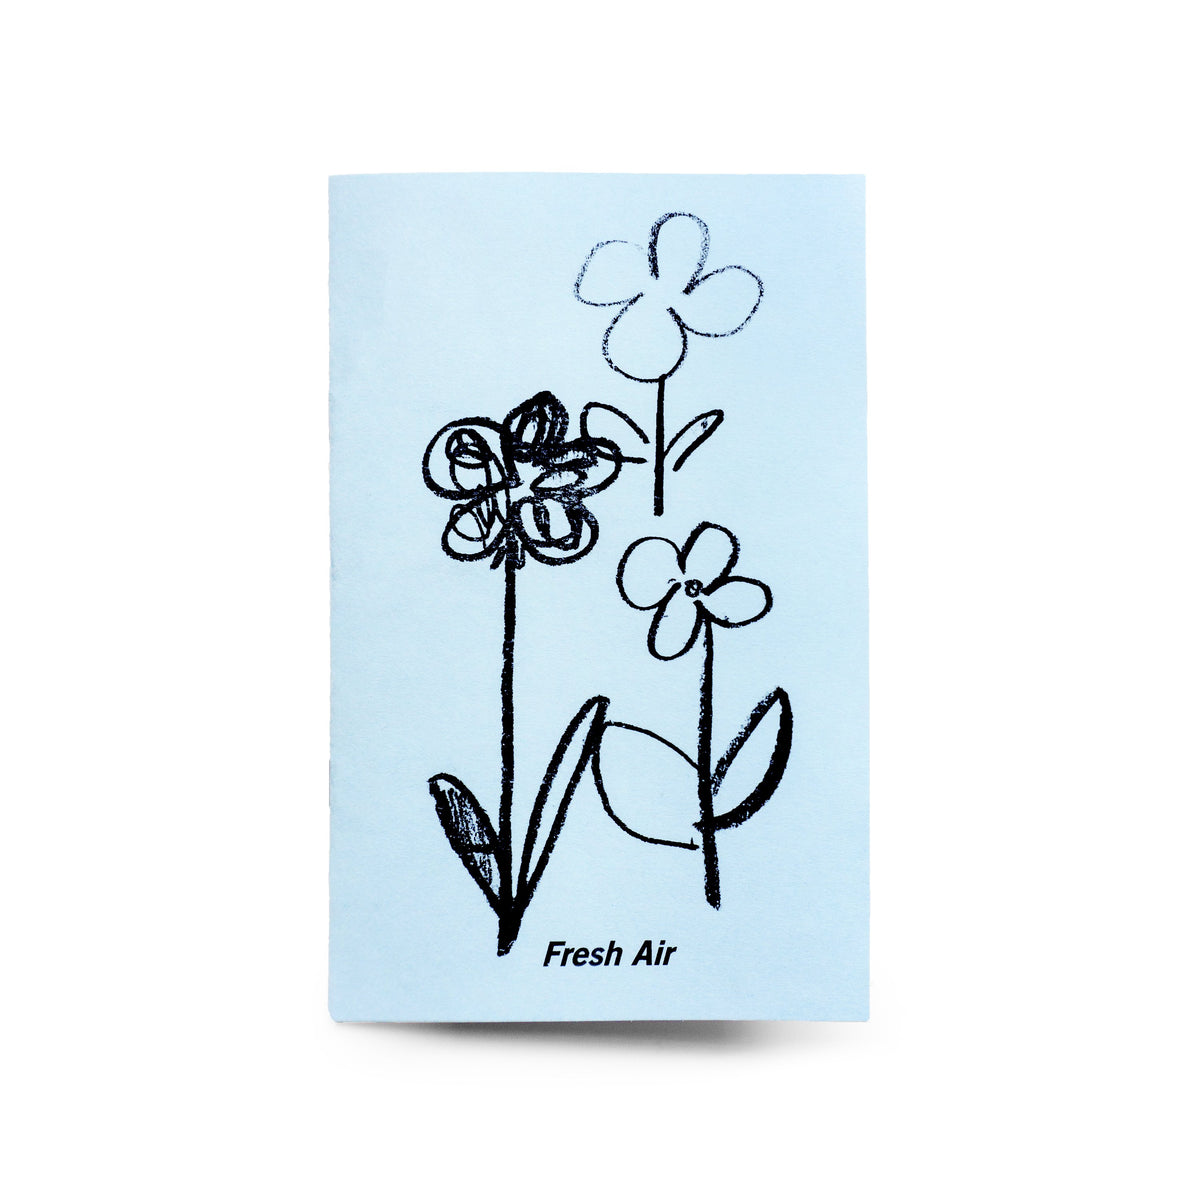 Cover of "Fresh Air" by Christian Stearry, a 20 page zine.  Photo features the cover of the zine, which showcases some illustrated flowers and the title "Fresh Air".